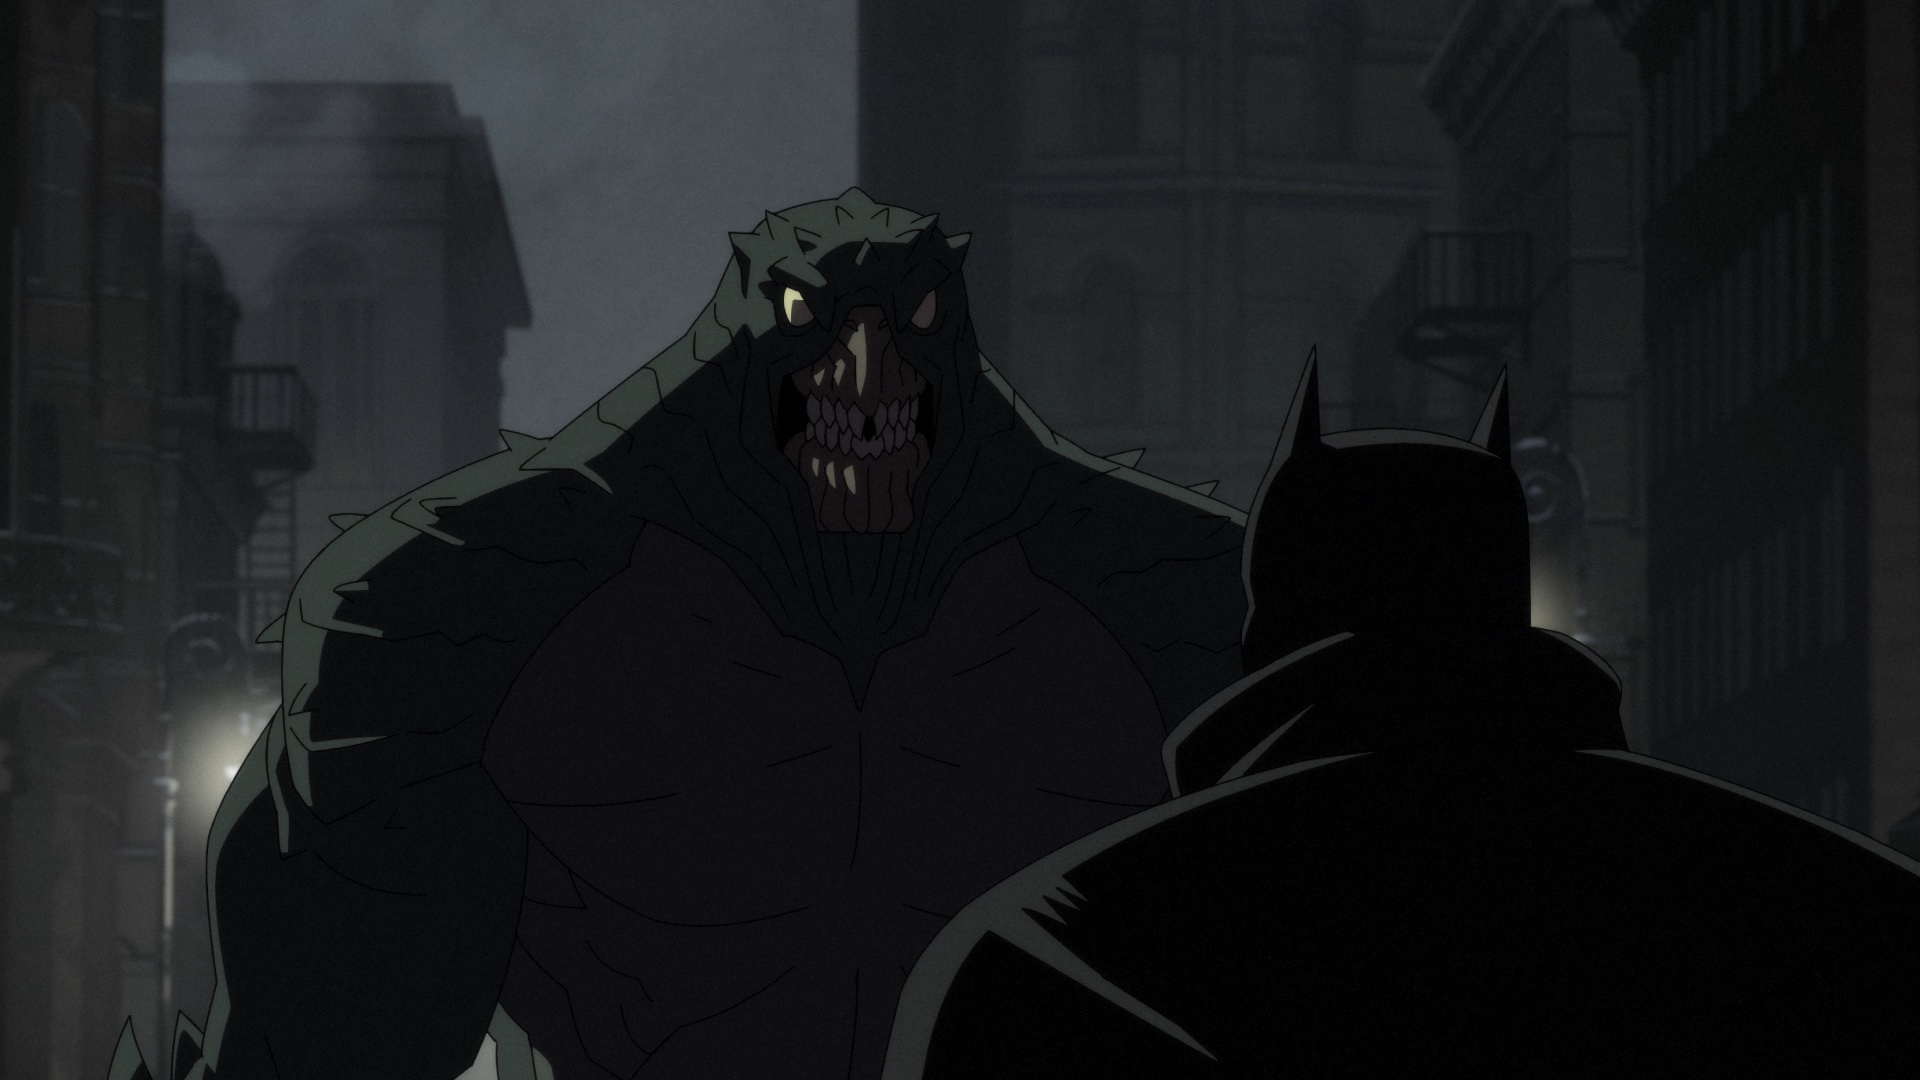 Batman's villains get Lovecraftian makeover in images from DOOM THAT CAME  TO GOTHAM animated film